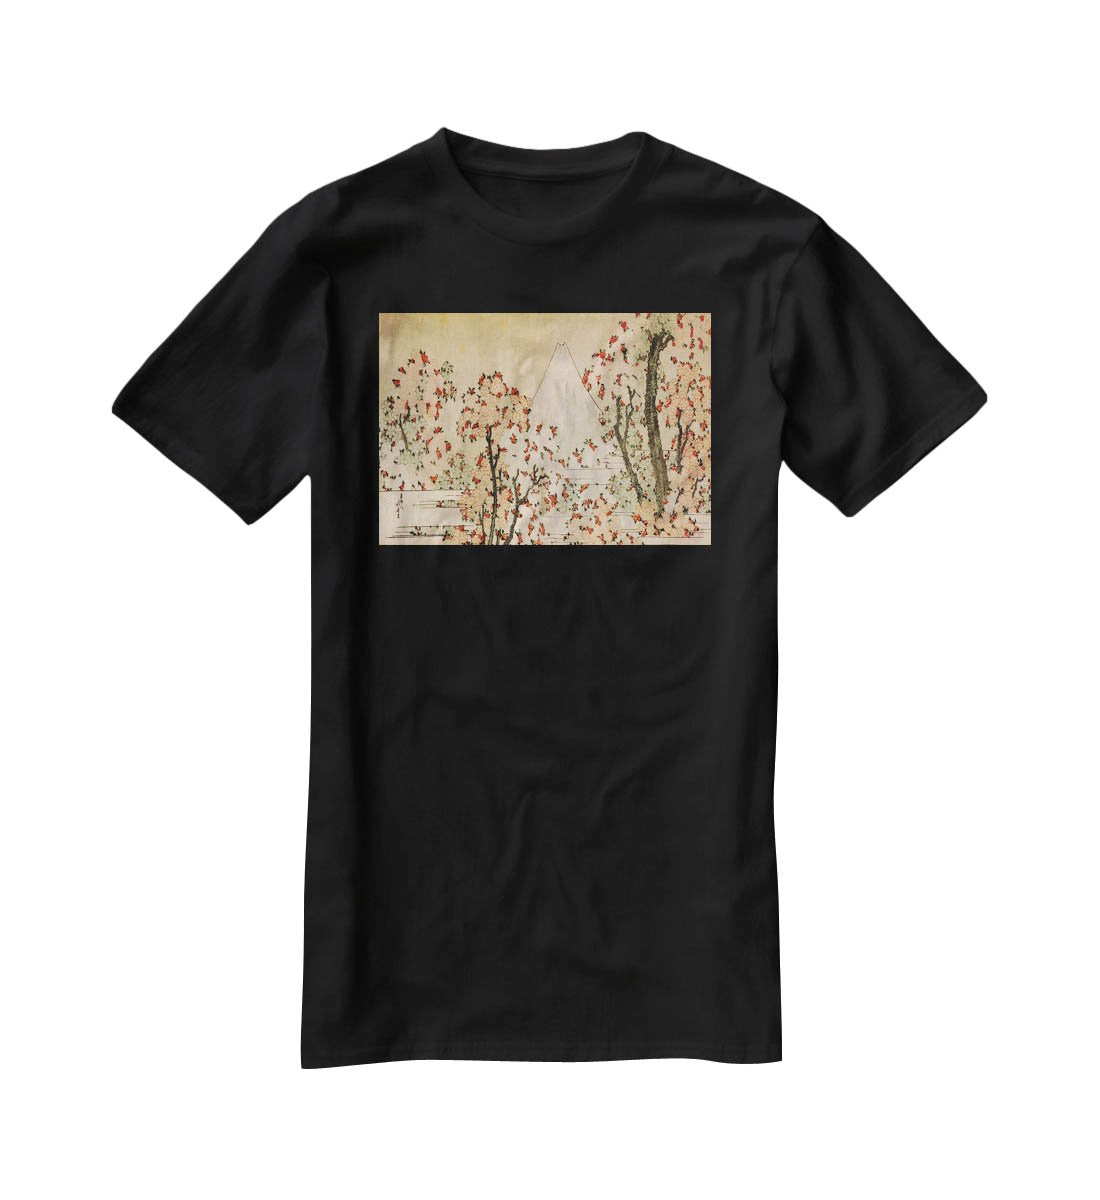 Mount Fuji behind cherry trees and flowers by Hokusai T-Shirt - Canvas Art Rocks - 1